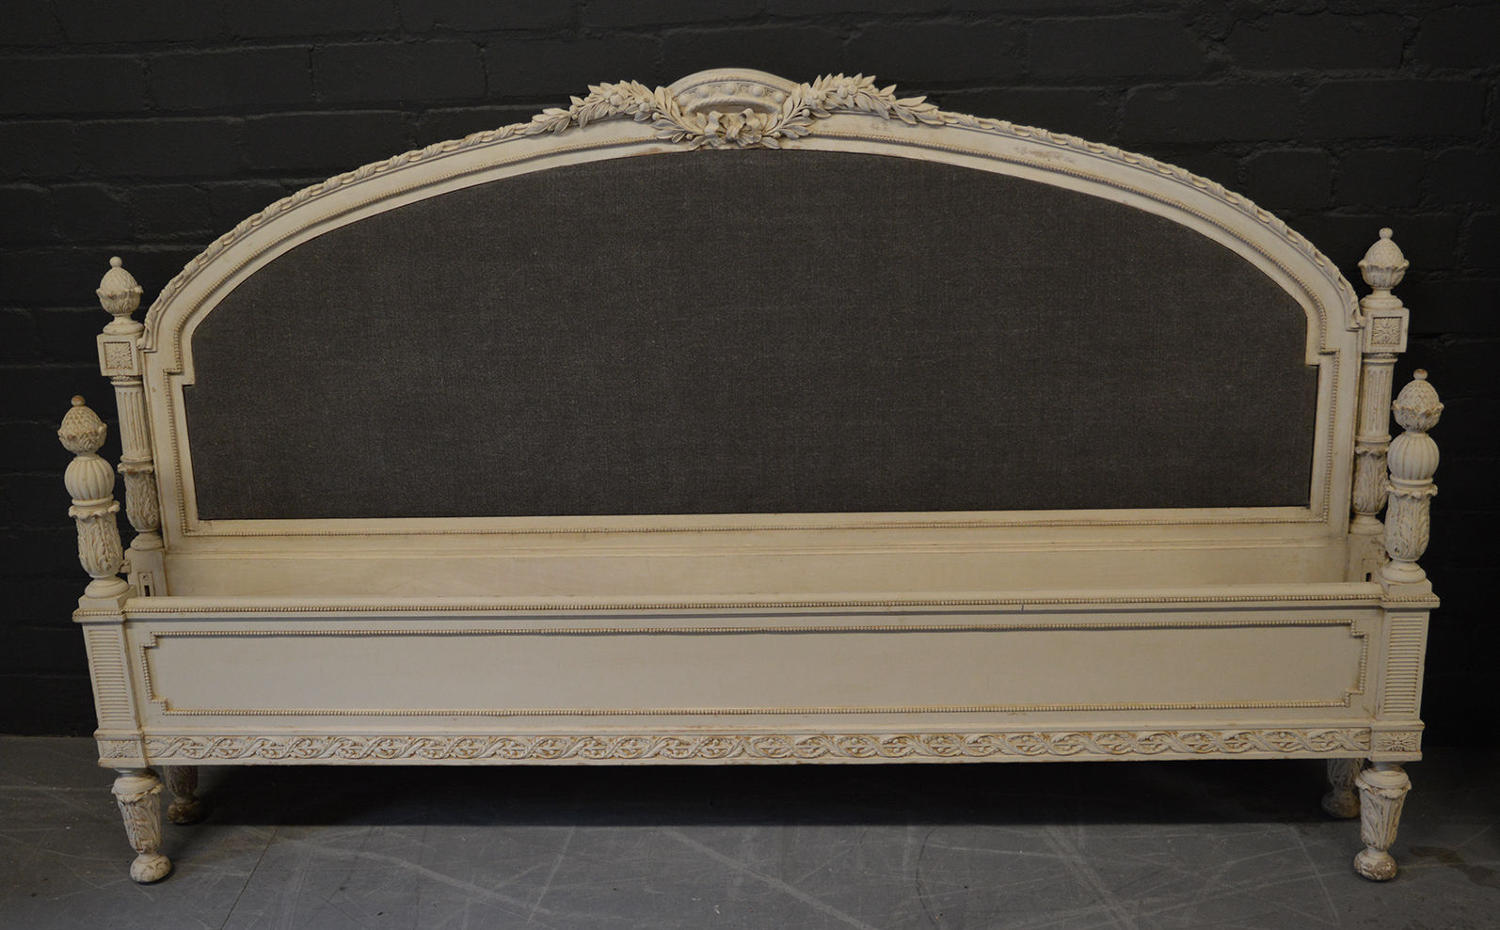 Large King size Louis XVI style upholstered bedstead